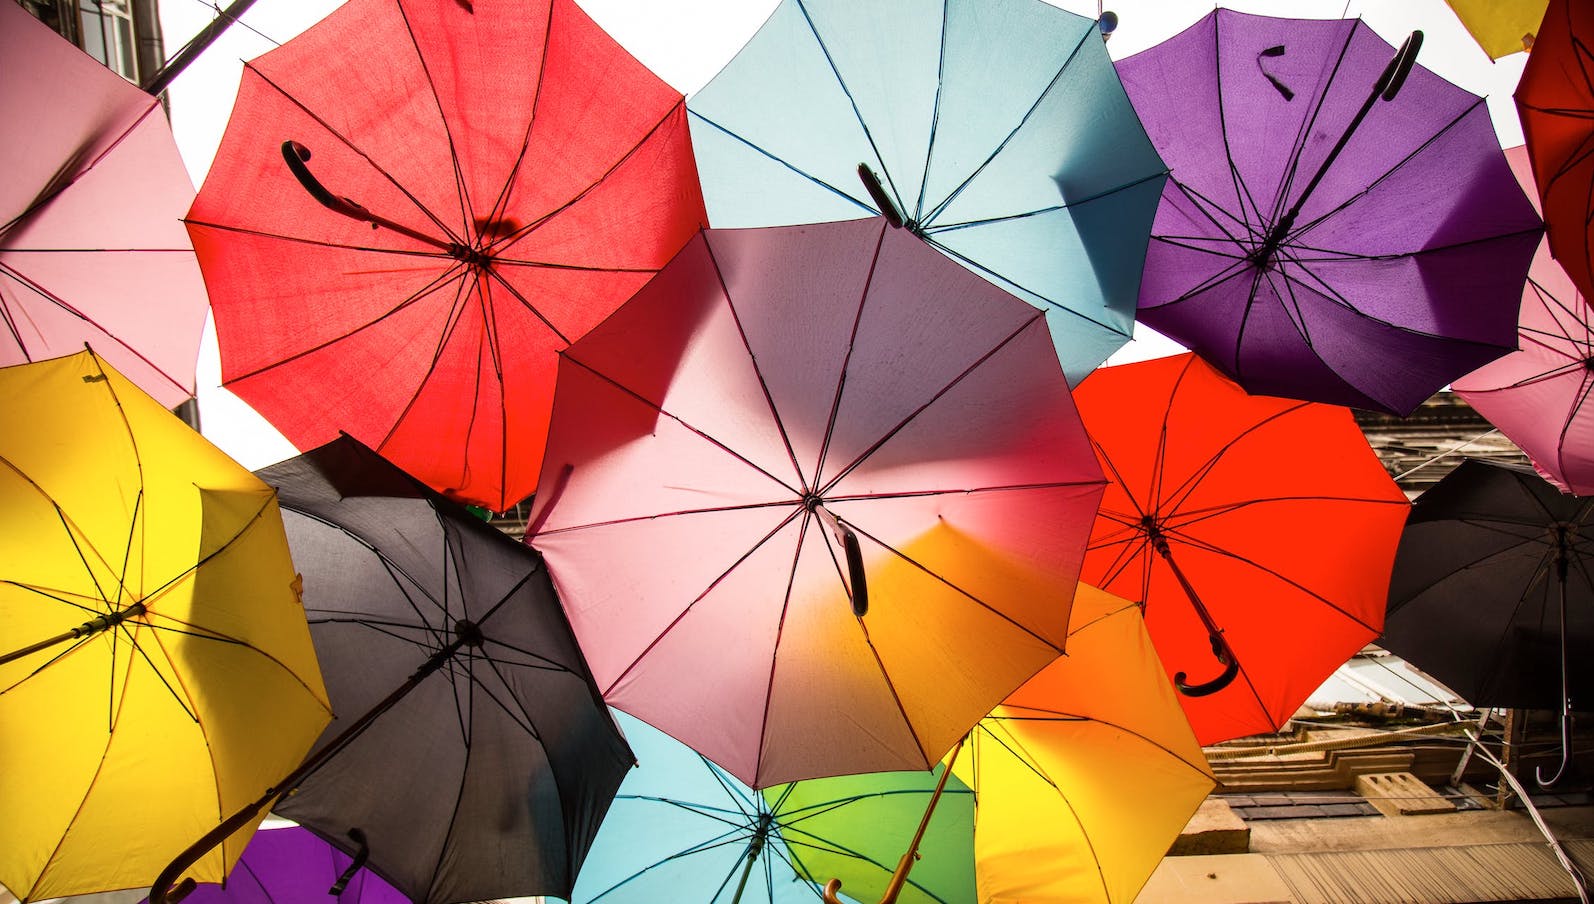 Multi-colored umbrellas from a low angle